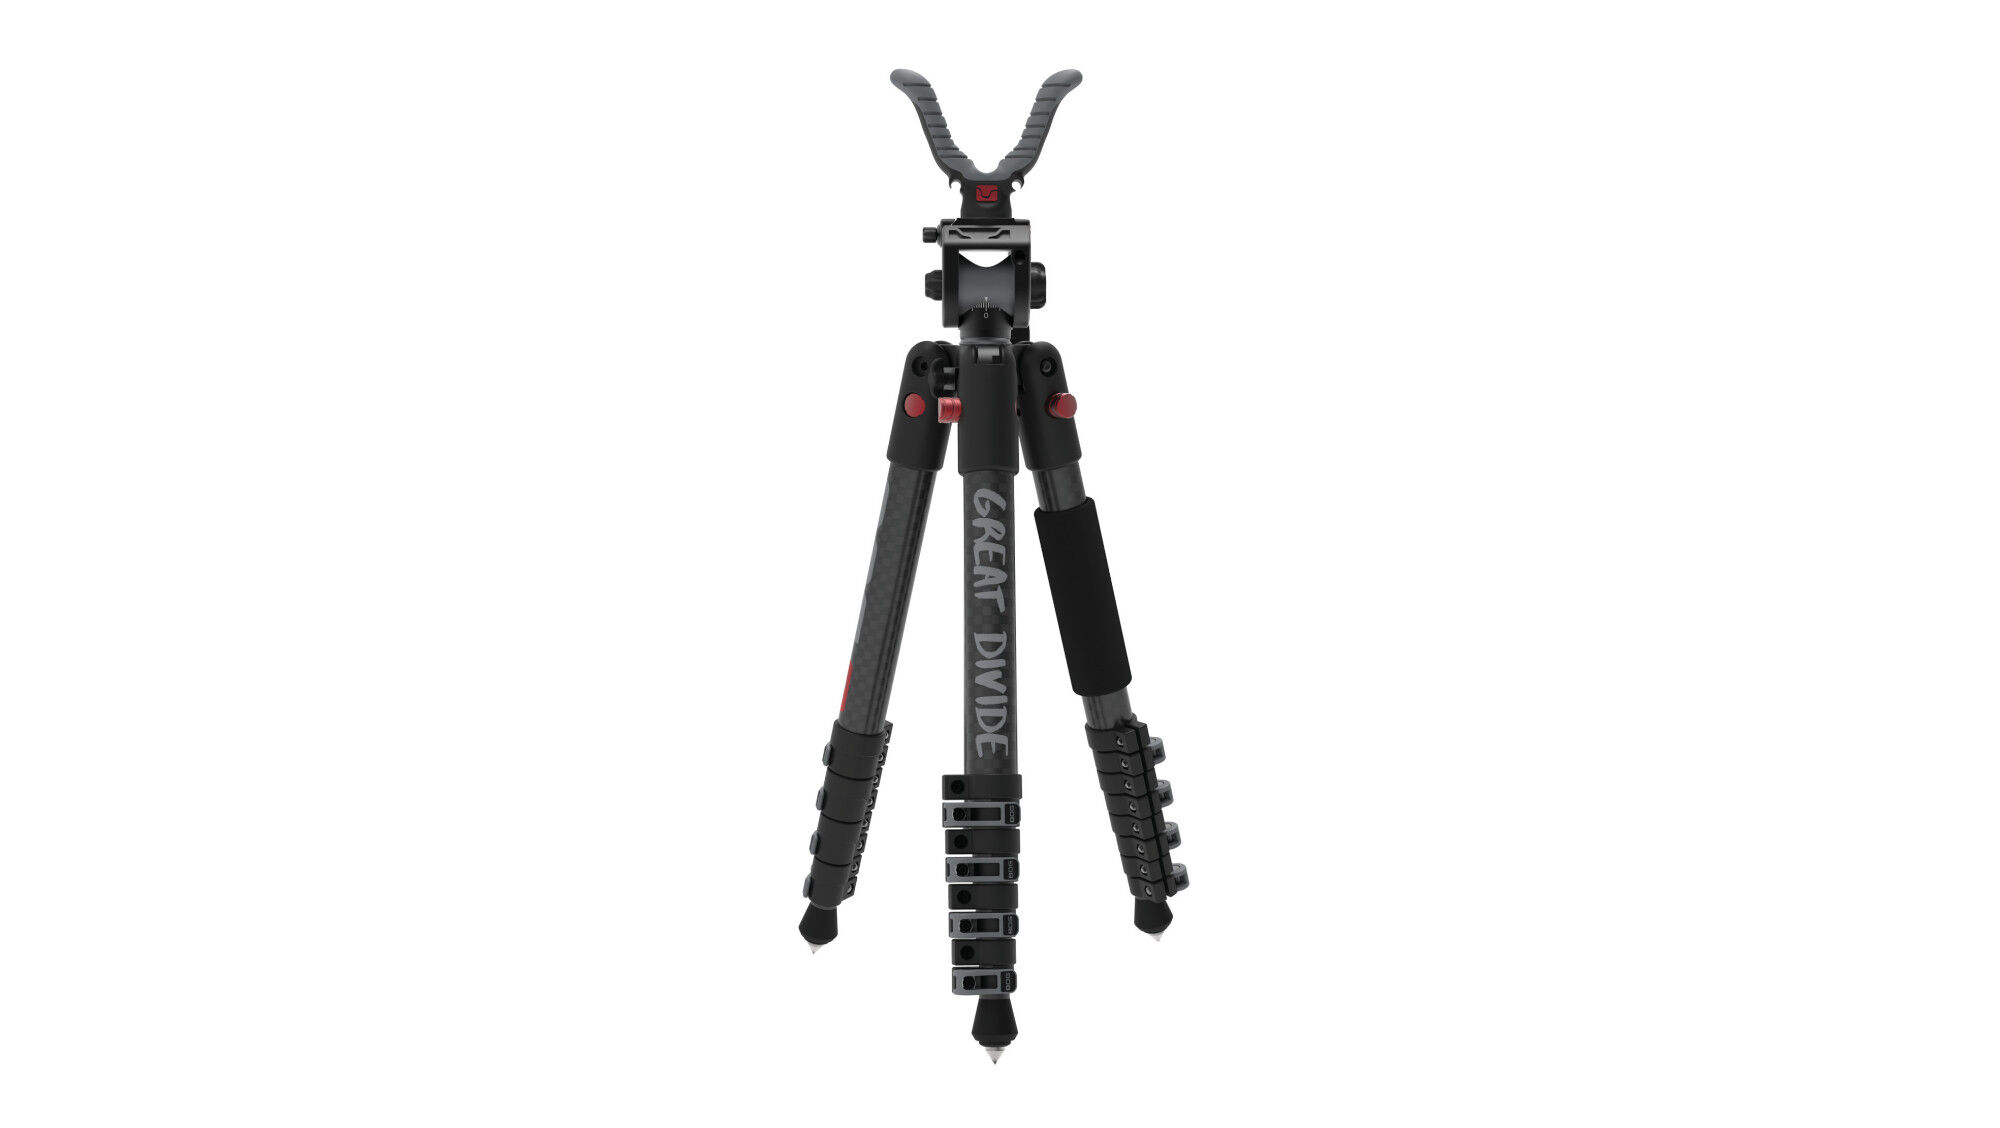 Lever Locks and USR for Hunting Black Model:1100483 Arca-Swiss Capability Retention Strap Shooting and Outdoors BOG Great Divide Western Tripod with Lightweight Carbon Fiber 